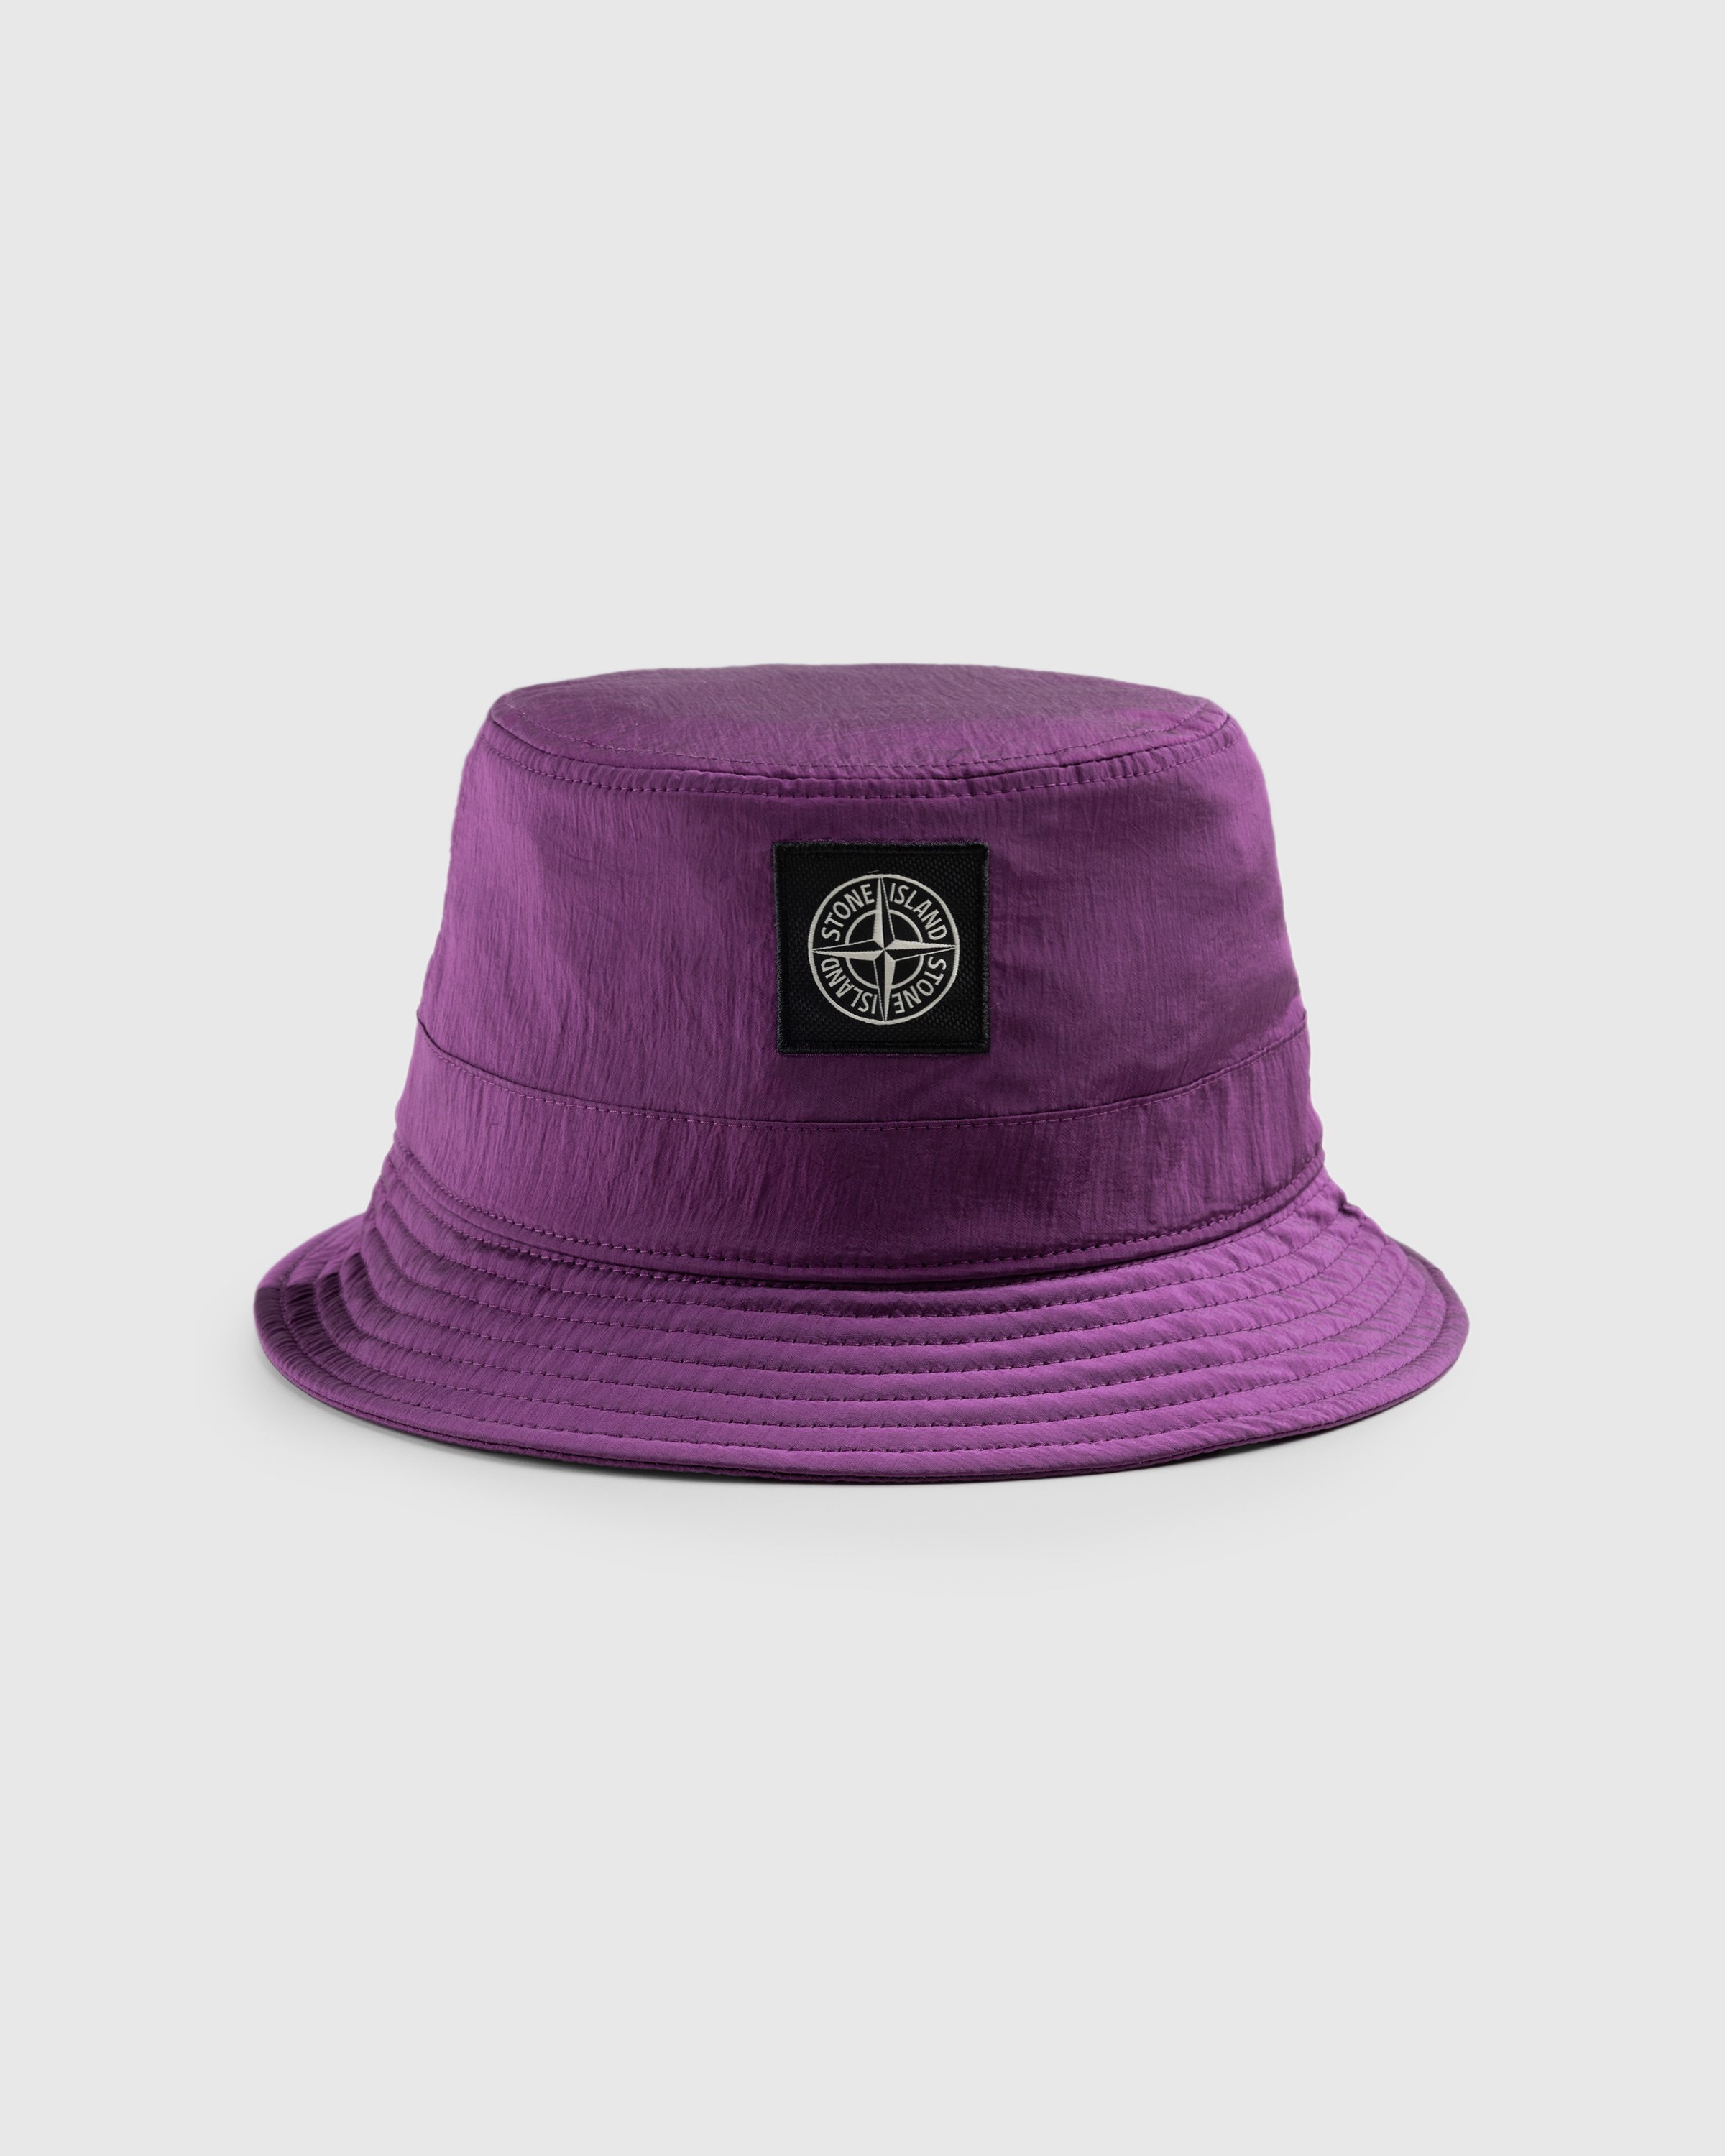 Stone Island - Cappello Pink 781599376 - Accessories - Pink - Image 1